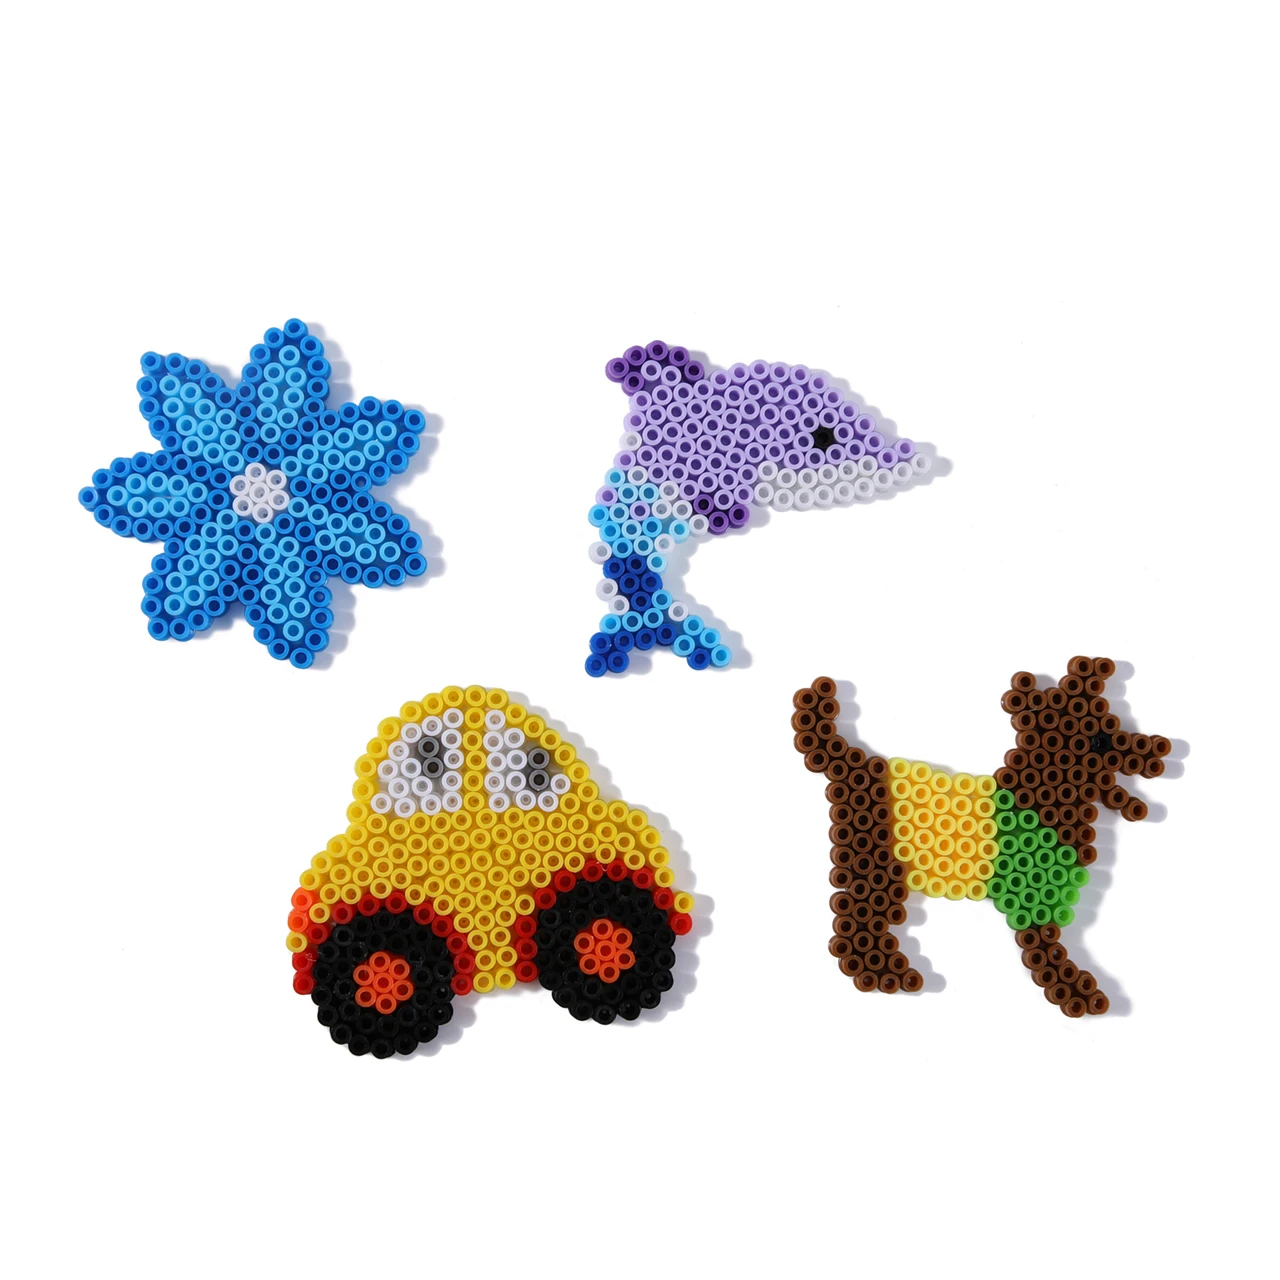 Buy Yirun Iron Beads Hot Selling Kids Toy  2020 Other Educational  Toys Xl Perler Beads Non-toxic Eco-friendly 9mm Hama Beads from Shantou Yi  Run Science And Education Industrial Co., Limited, China